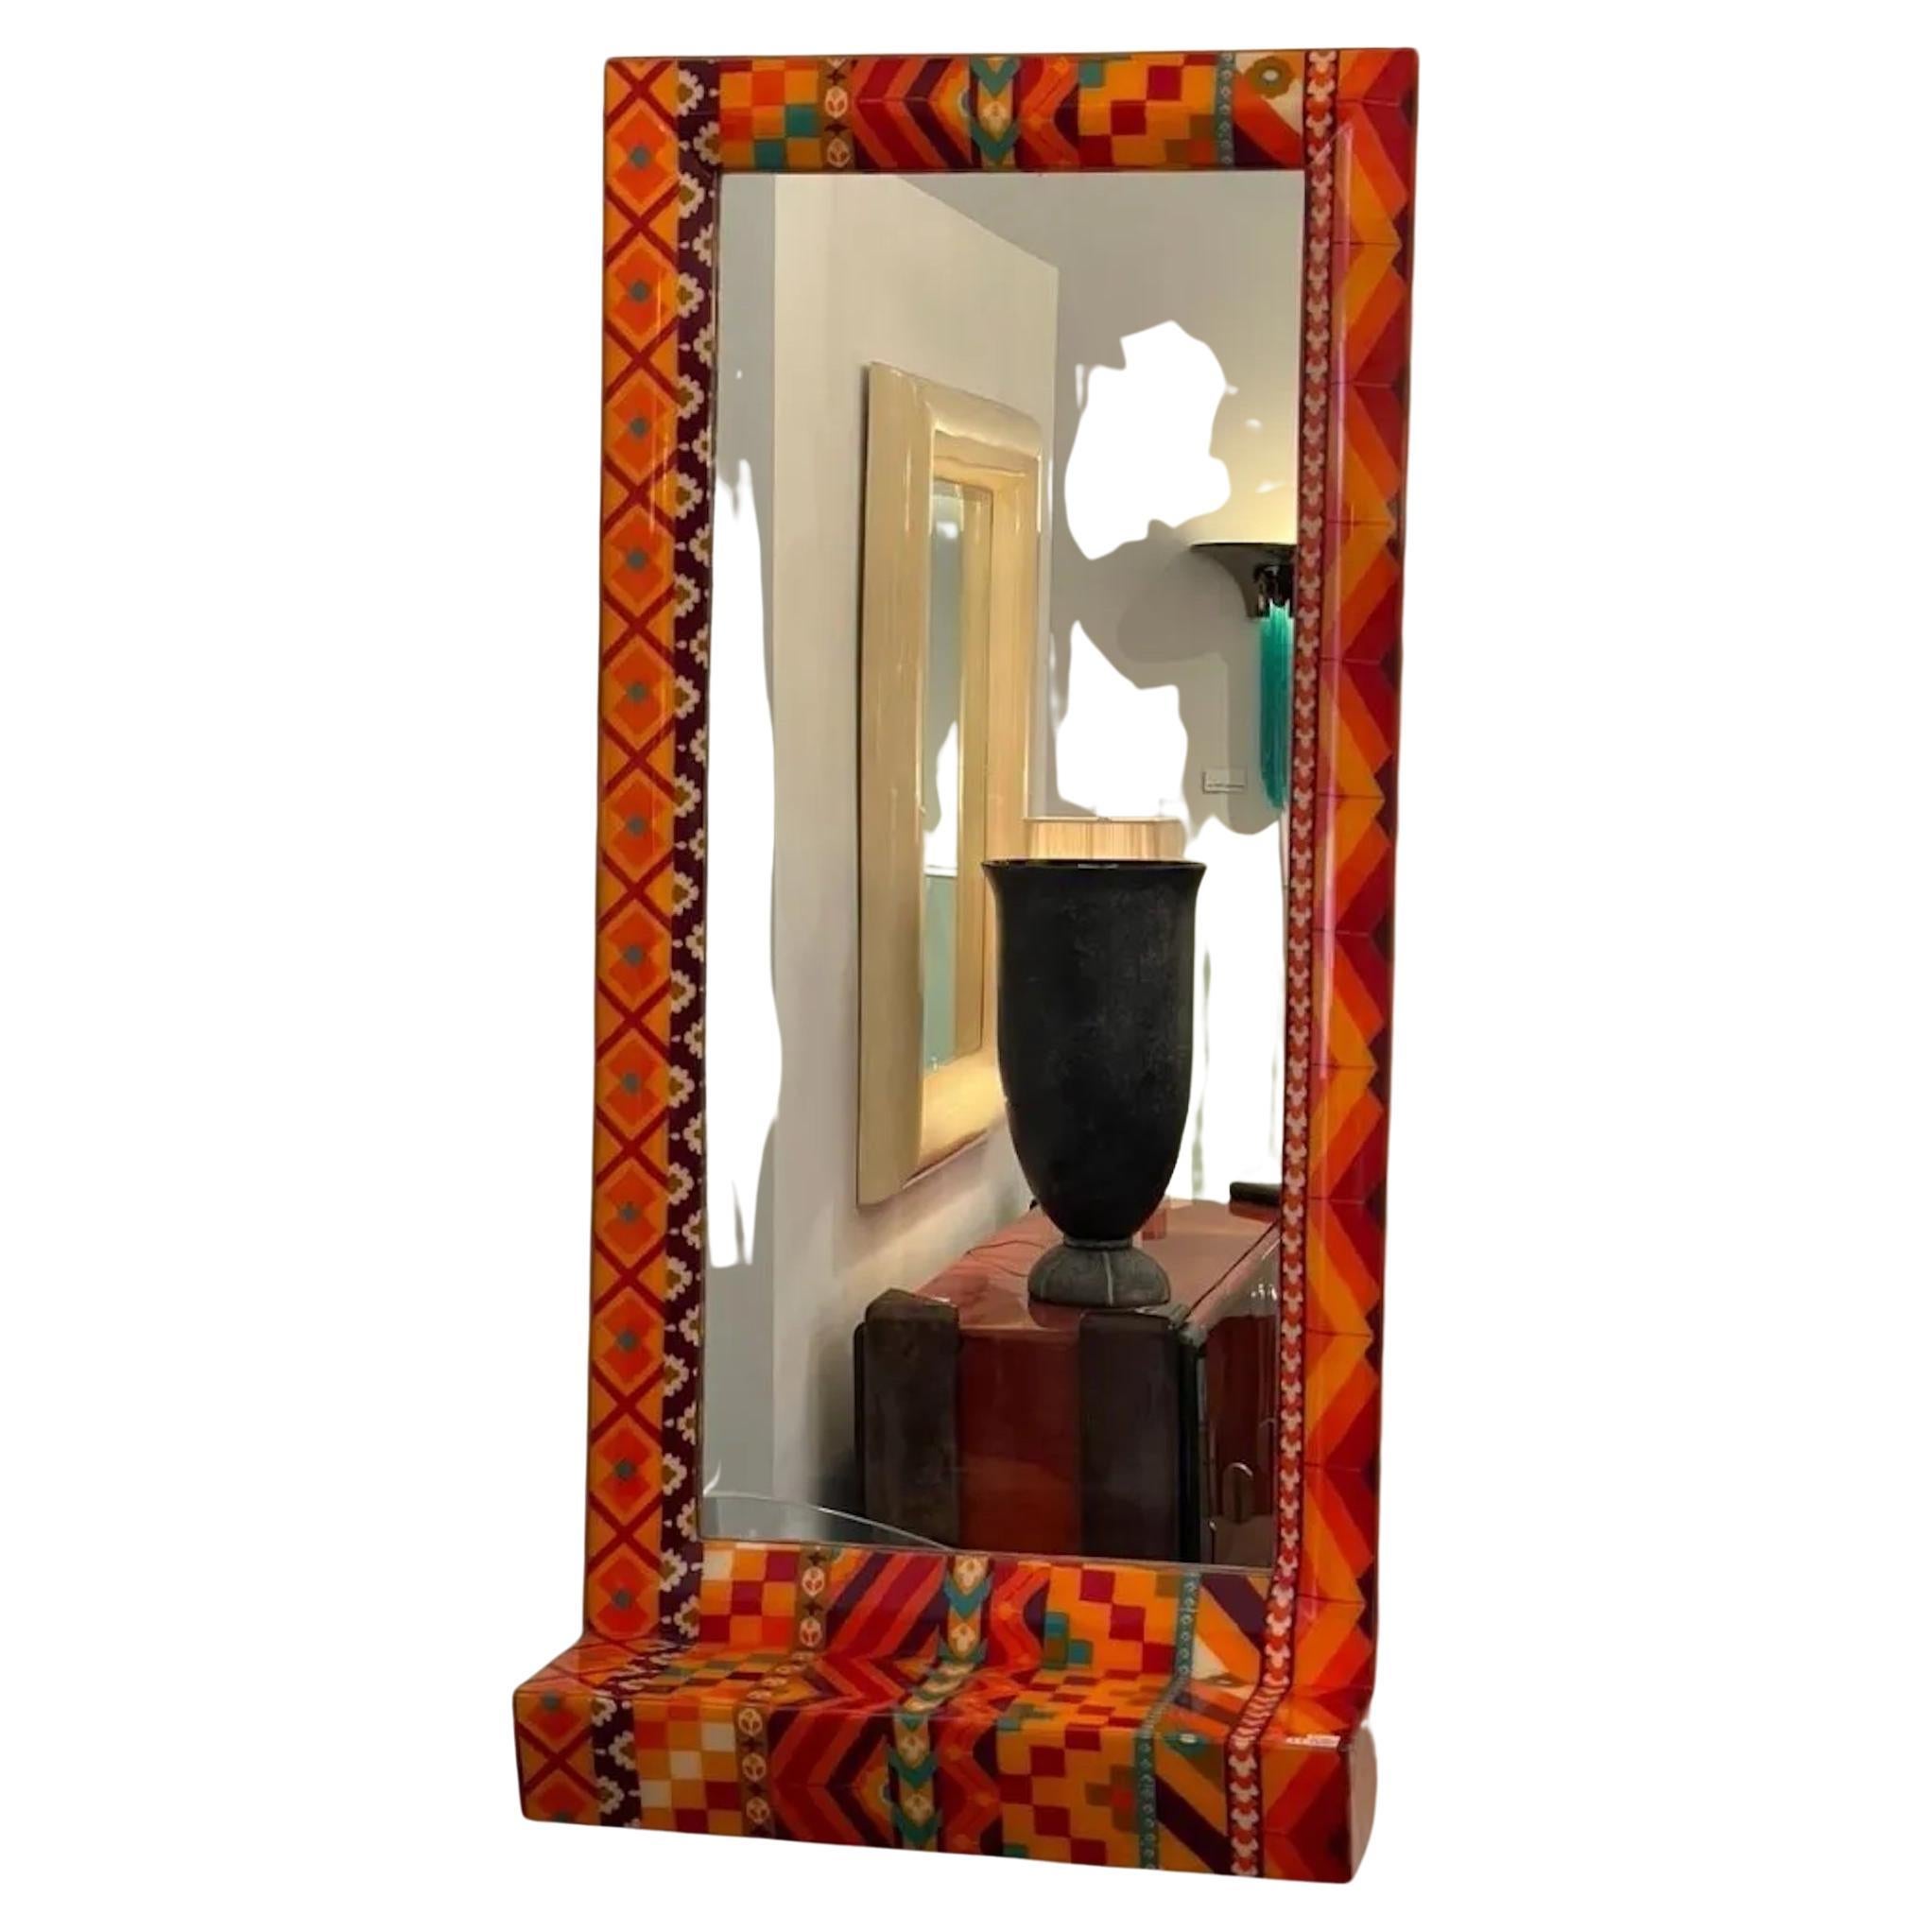 Unique colourful  lacquered fabric mirror by Karl Springer
Provenance: Property from the personal collection of Jeff Schuerholz of Fat Chance, the iconic Los Angeles store for the Hollywood elite.
USA: circa 1970